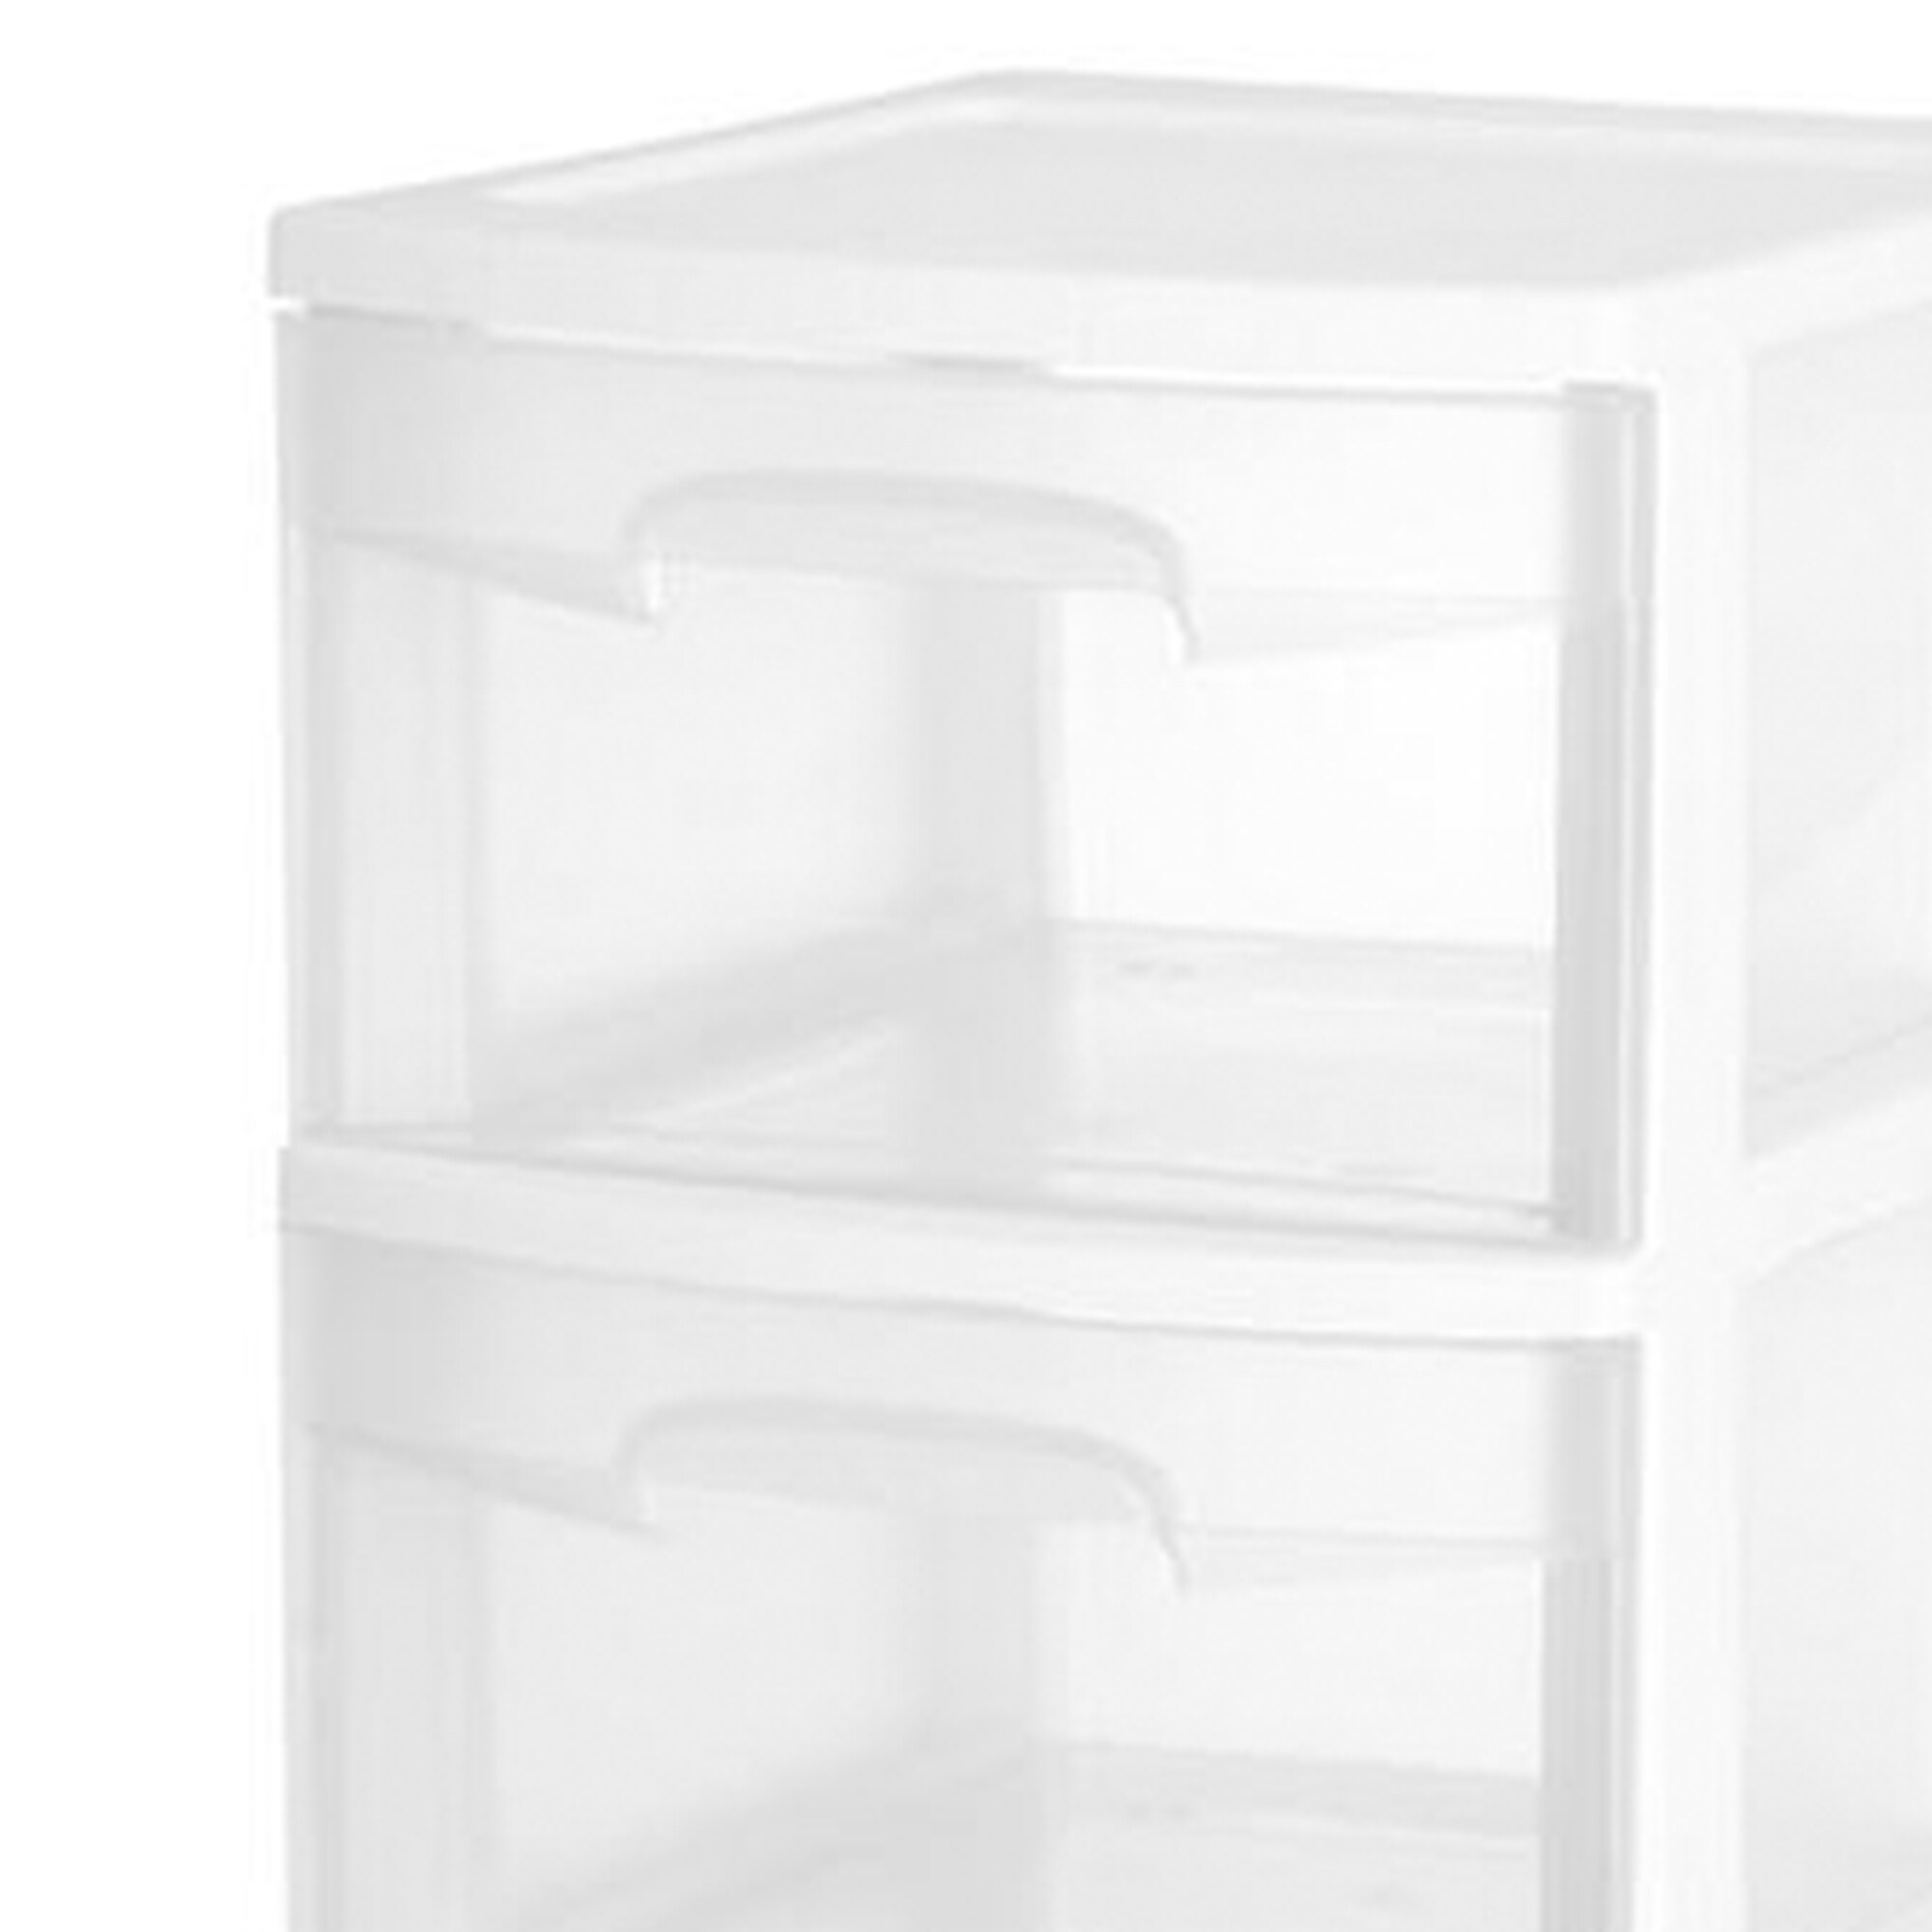 https://ak1.ostkcdn.com/images/products/is/images/direct/aa2fd179c04e98bd5cbe870d86f9c926821d12b8/Sterilite-Home-3-Drawer-Wide-Wheeled-Plastic-Storage-Container%2C-Clear-%282-Pack%29.jpg